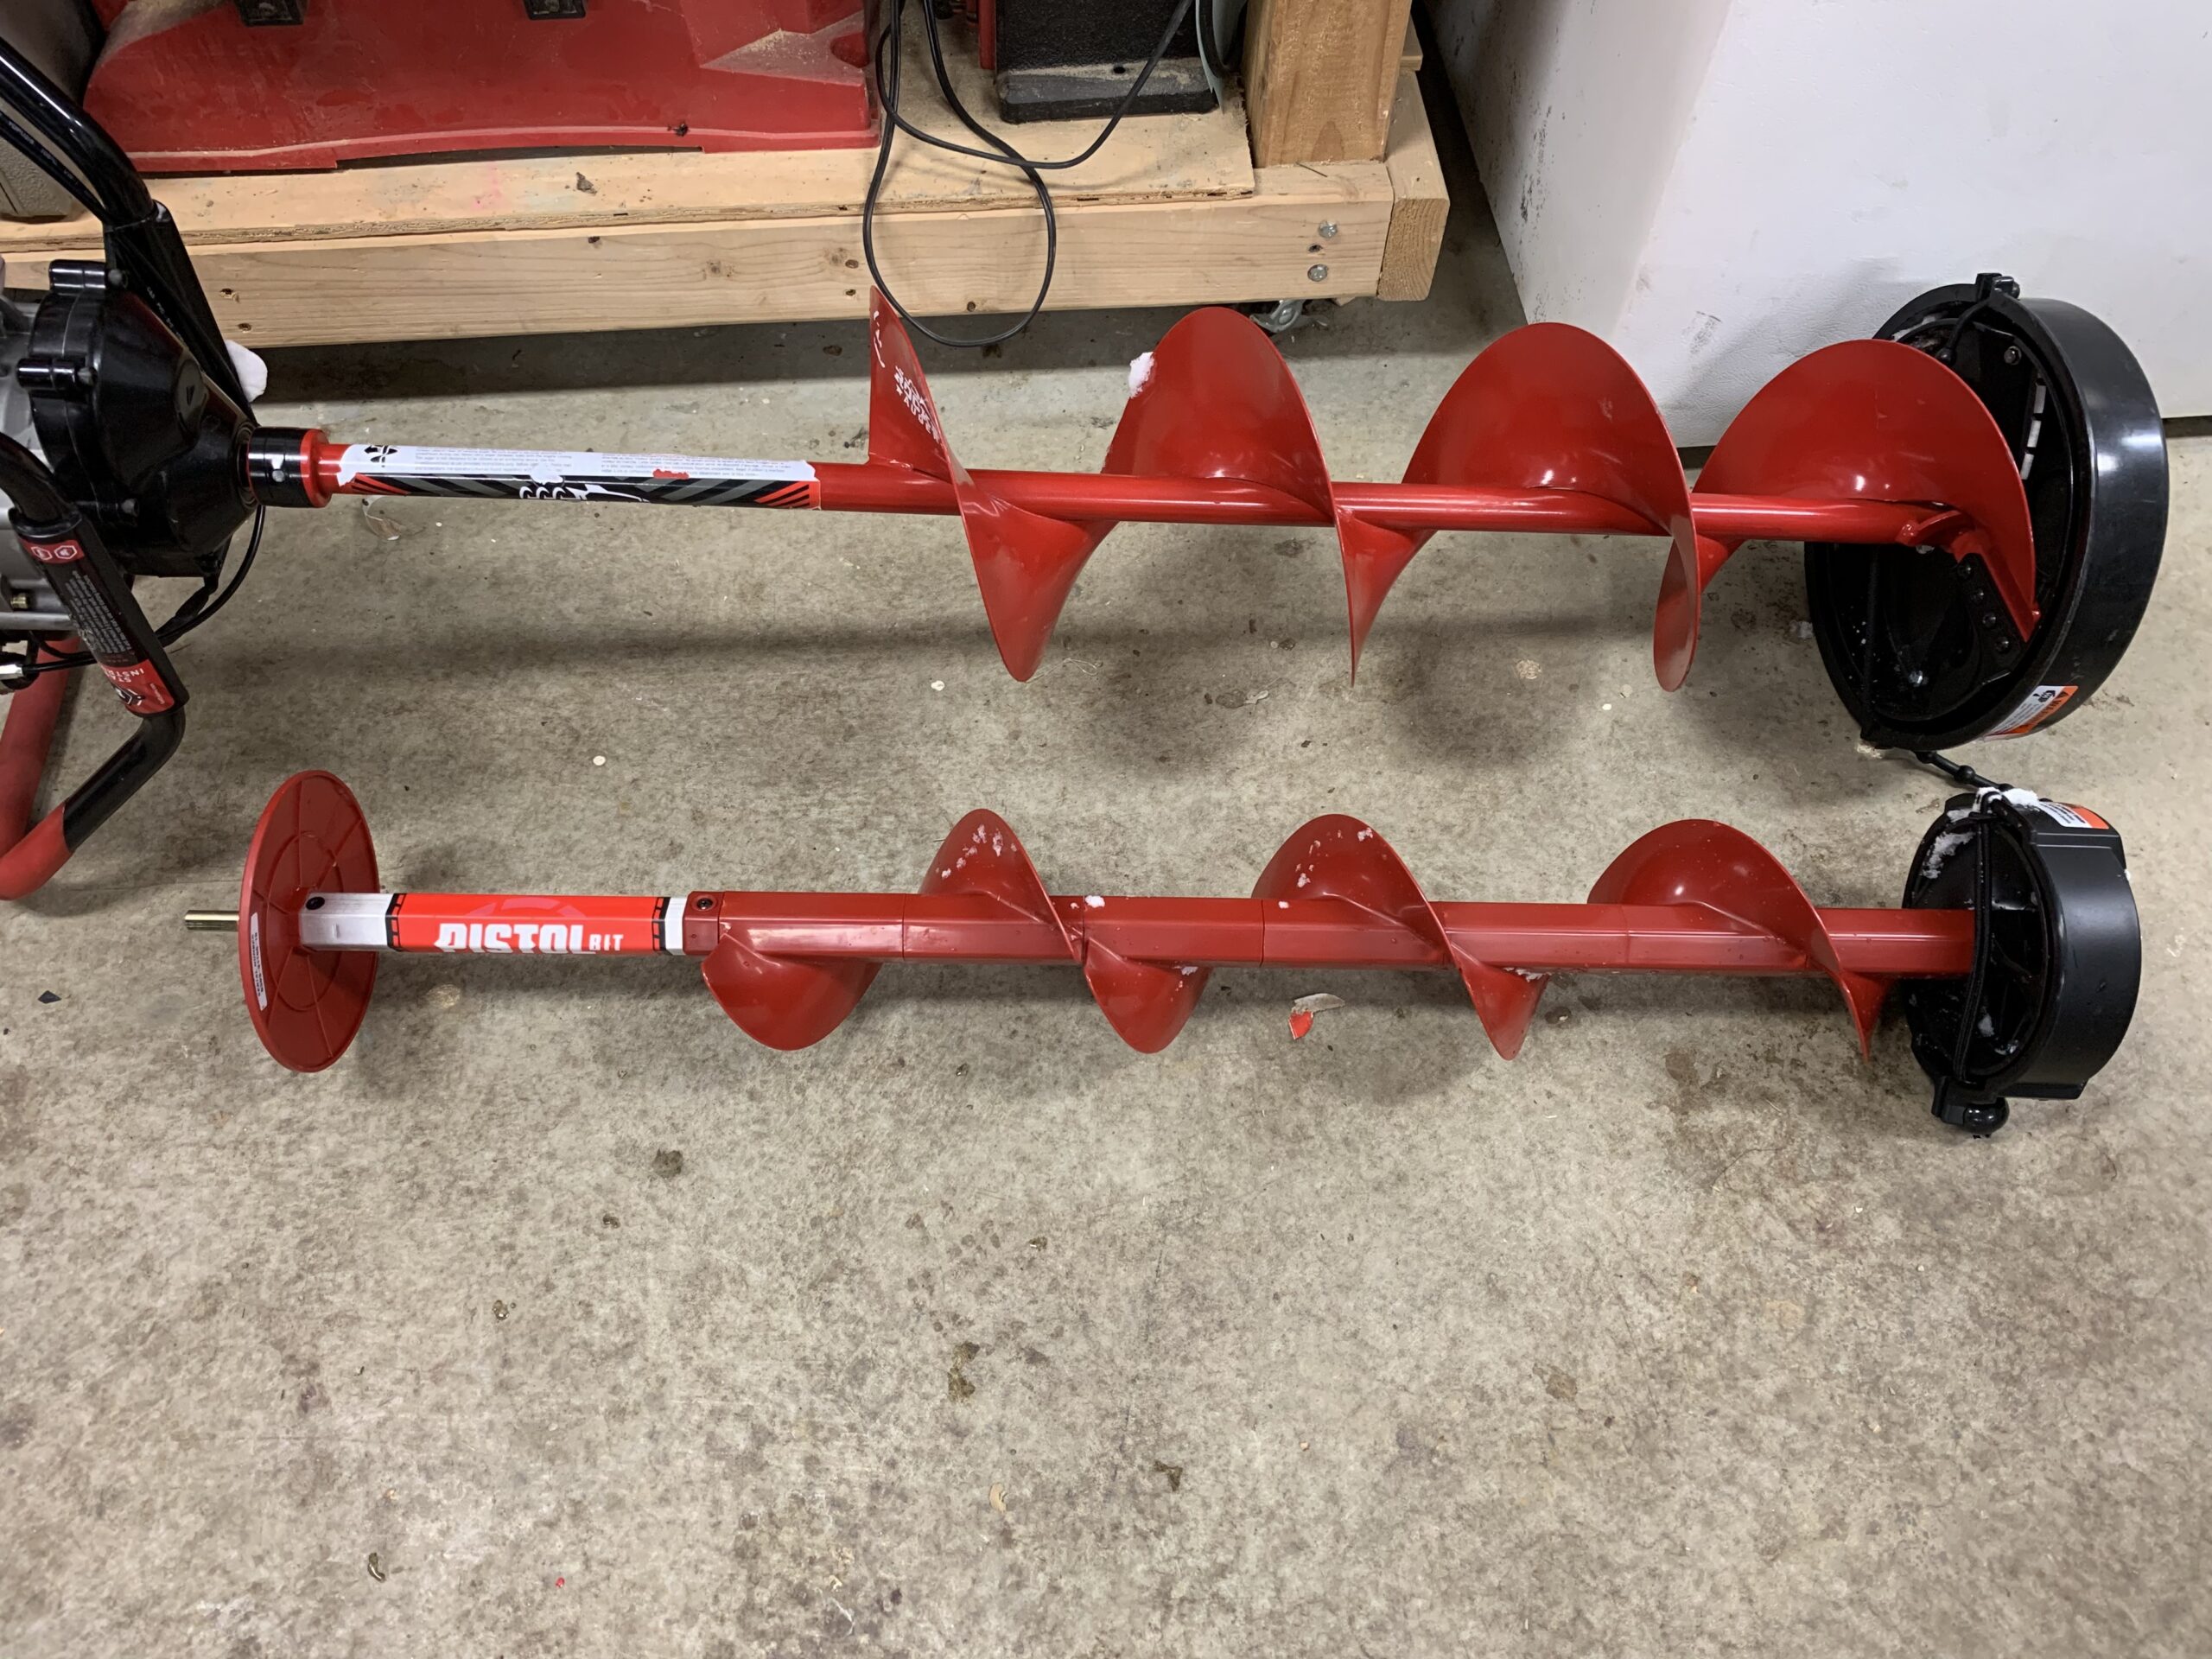 Drill-Powered Augers: Gimmick or Serious Ice-Fishing Tool